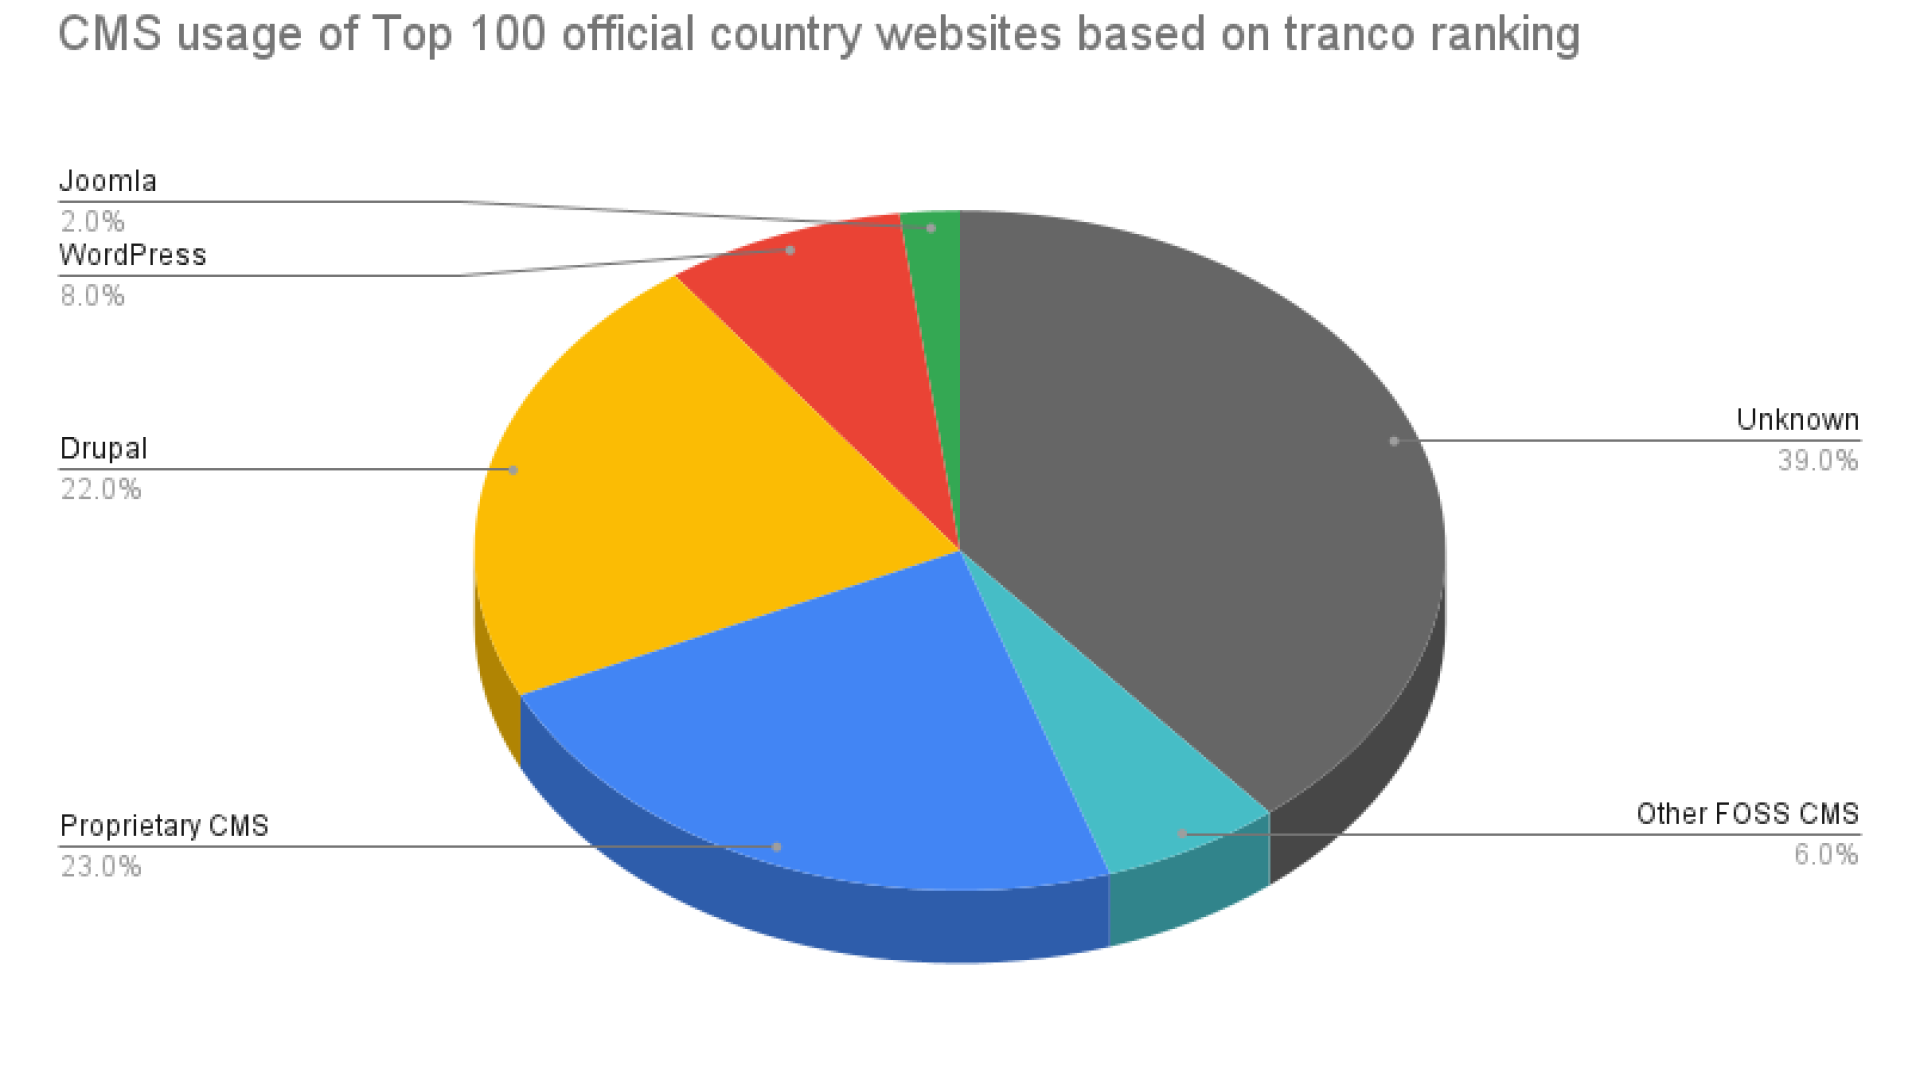 CMS usage of top 100 official country websites based on Tranco ranking